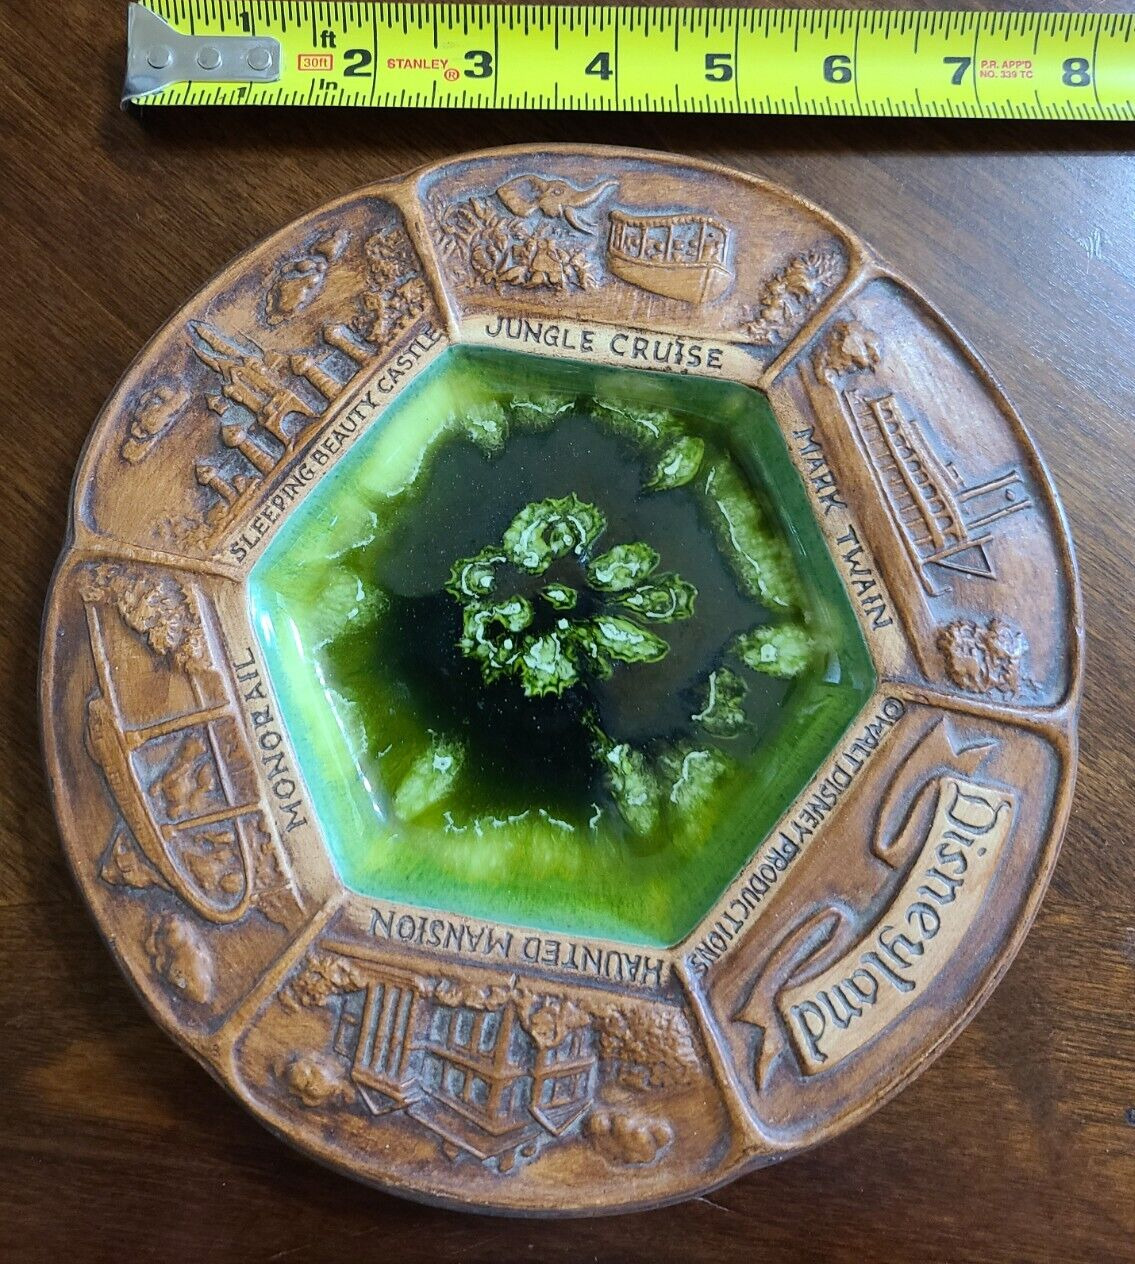 Vintage Disneyland Ashtray Plate Green Glaze With Attractions Listed Mark Twain